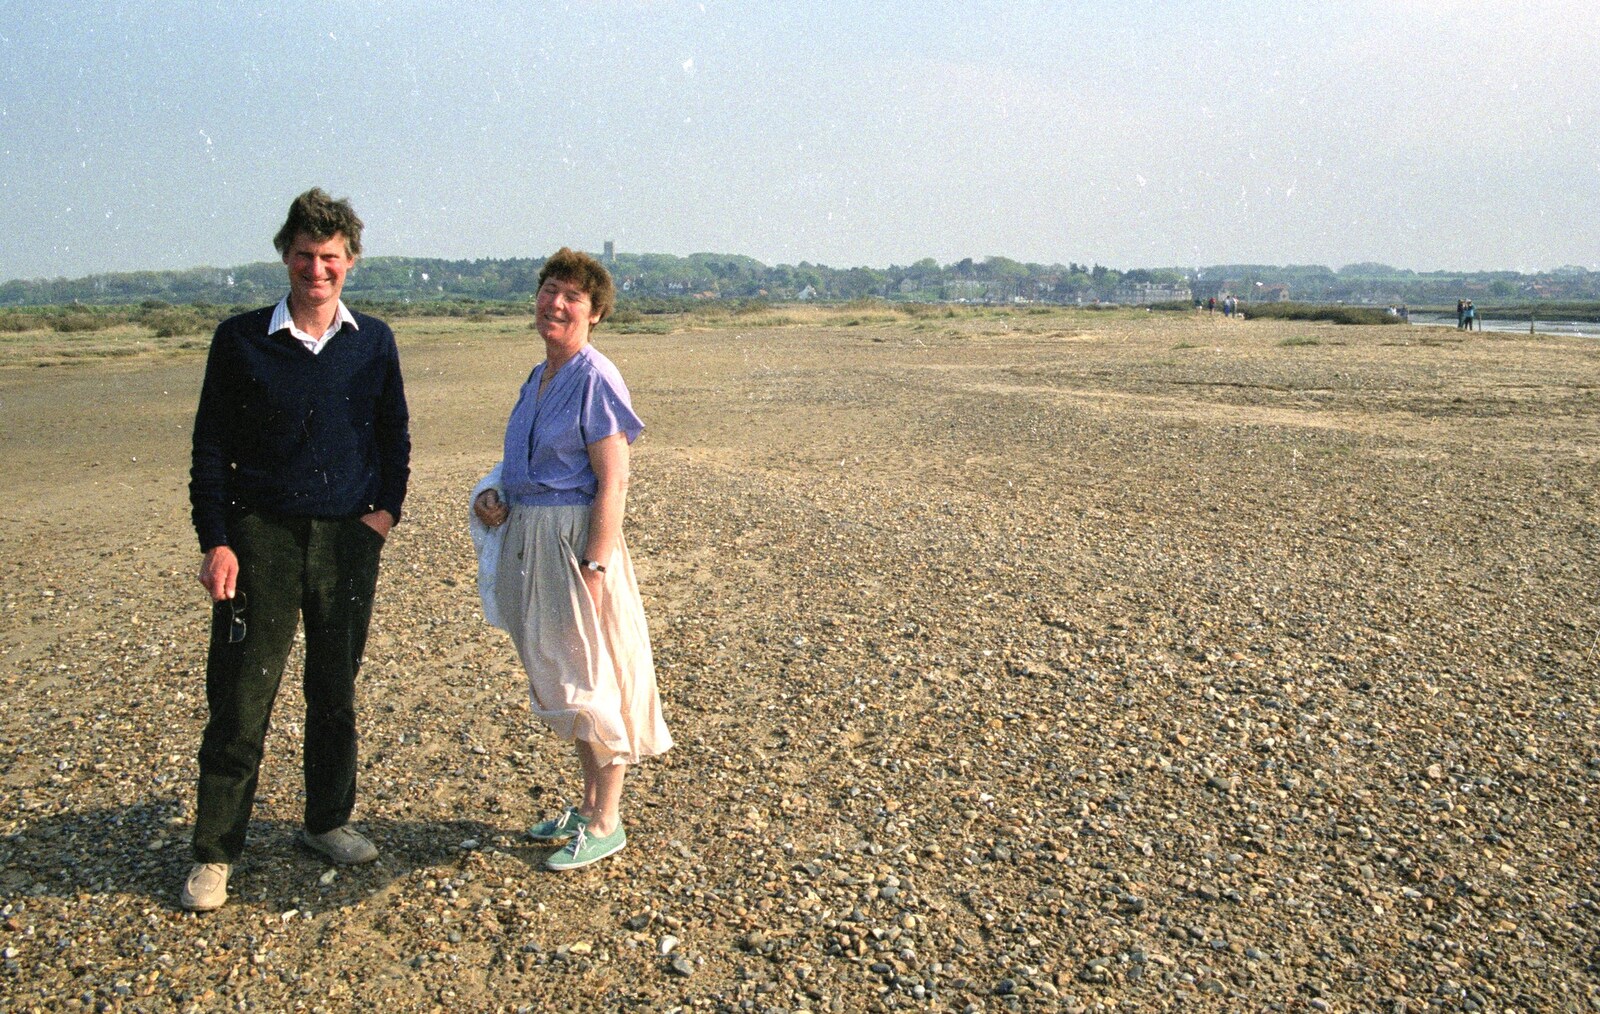 Geoff and Brenda at Blakeney from Tapestry With Baz, and a Trip to Blakeney, Suffolk and Norfolk - 14th May 1990